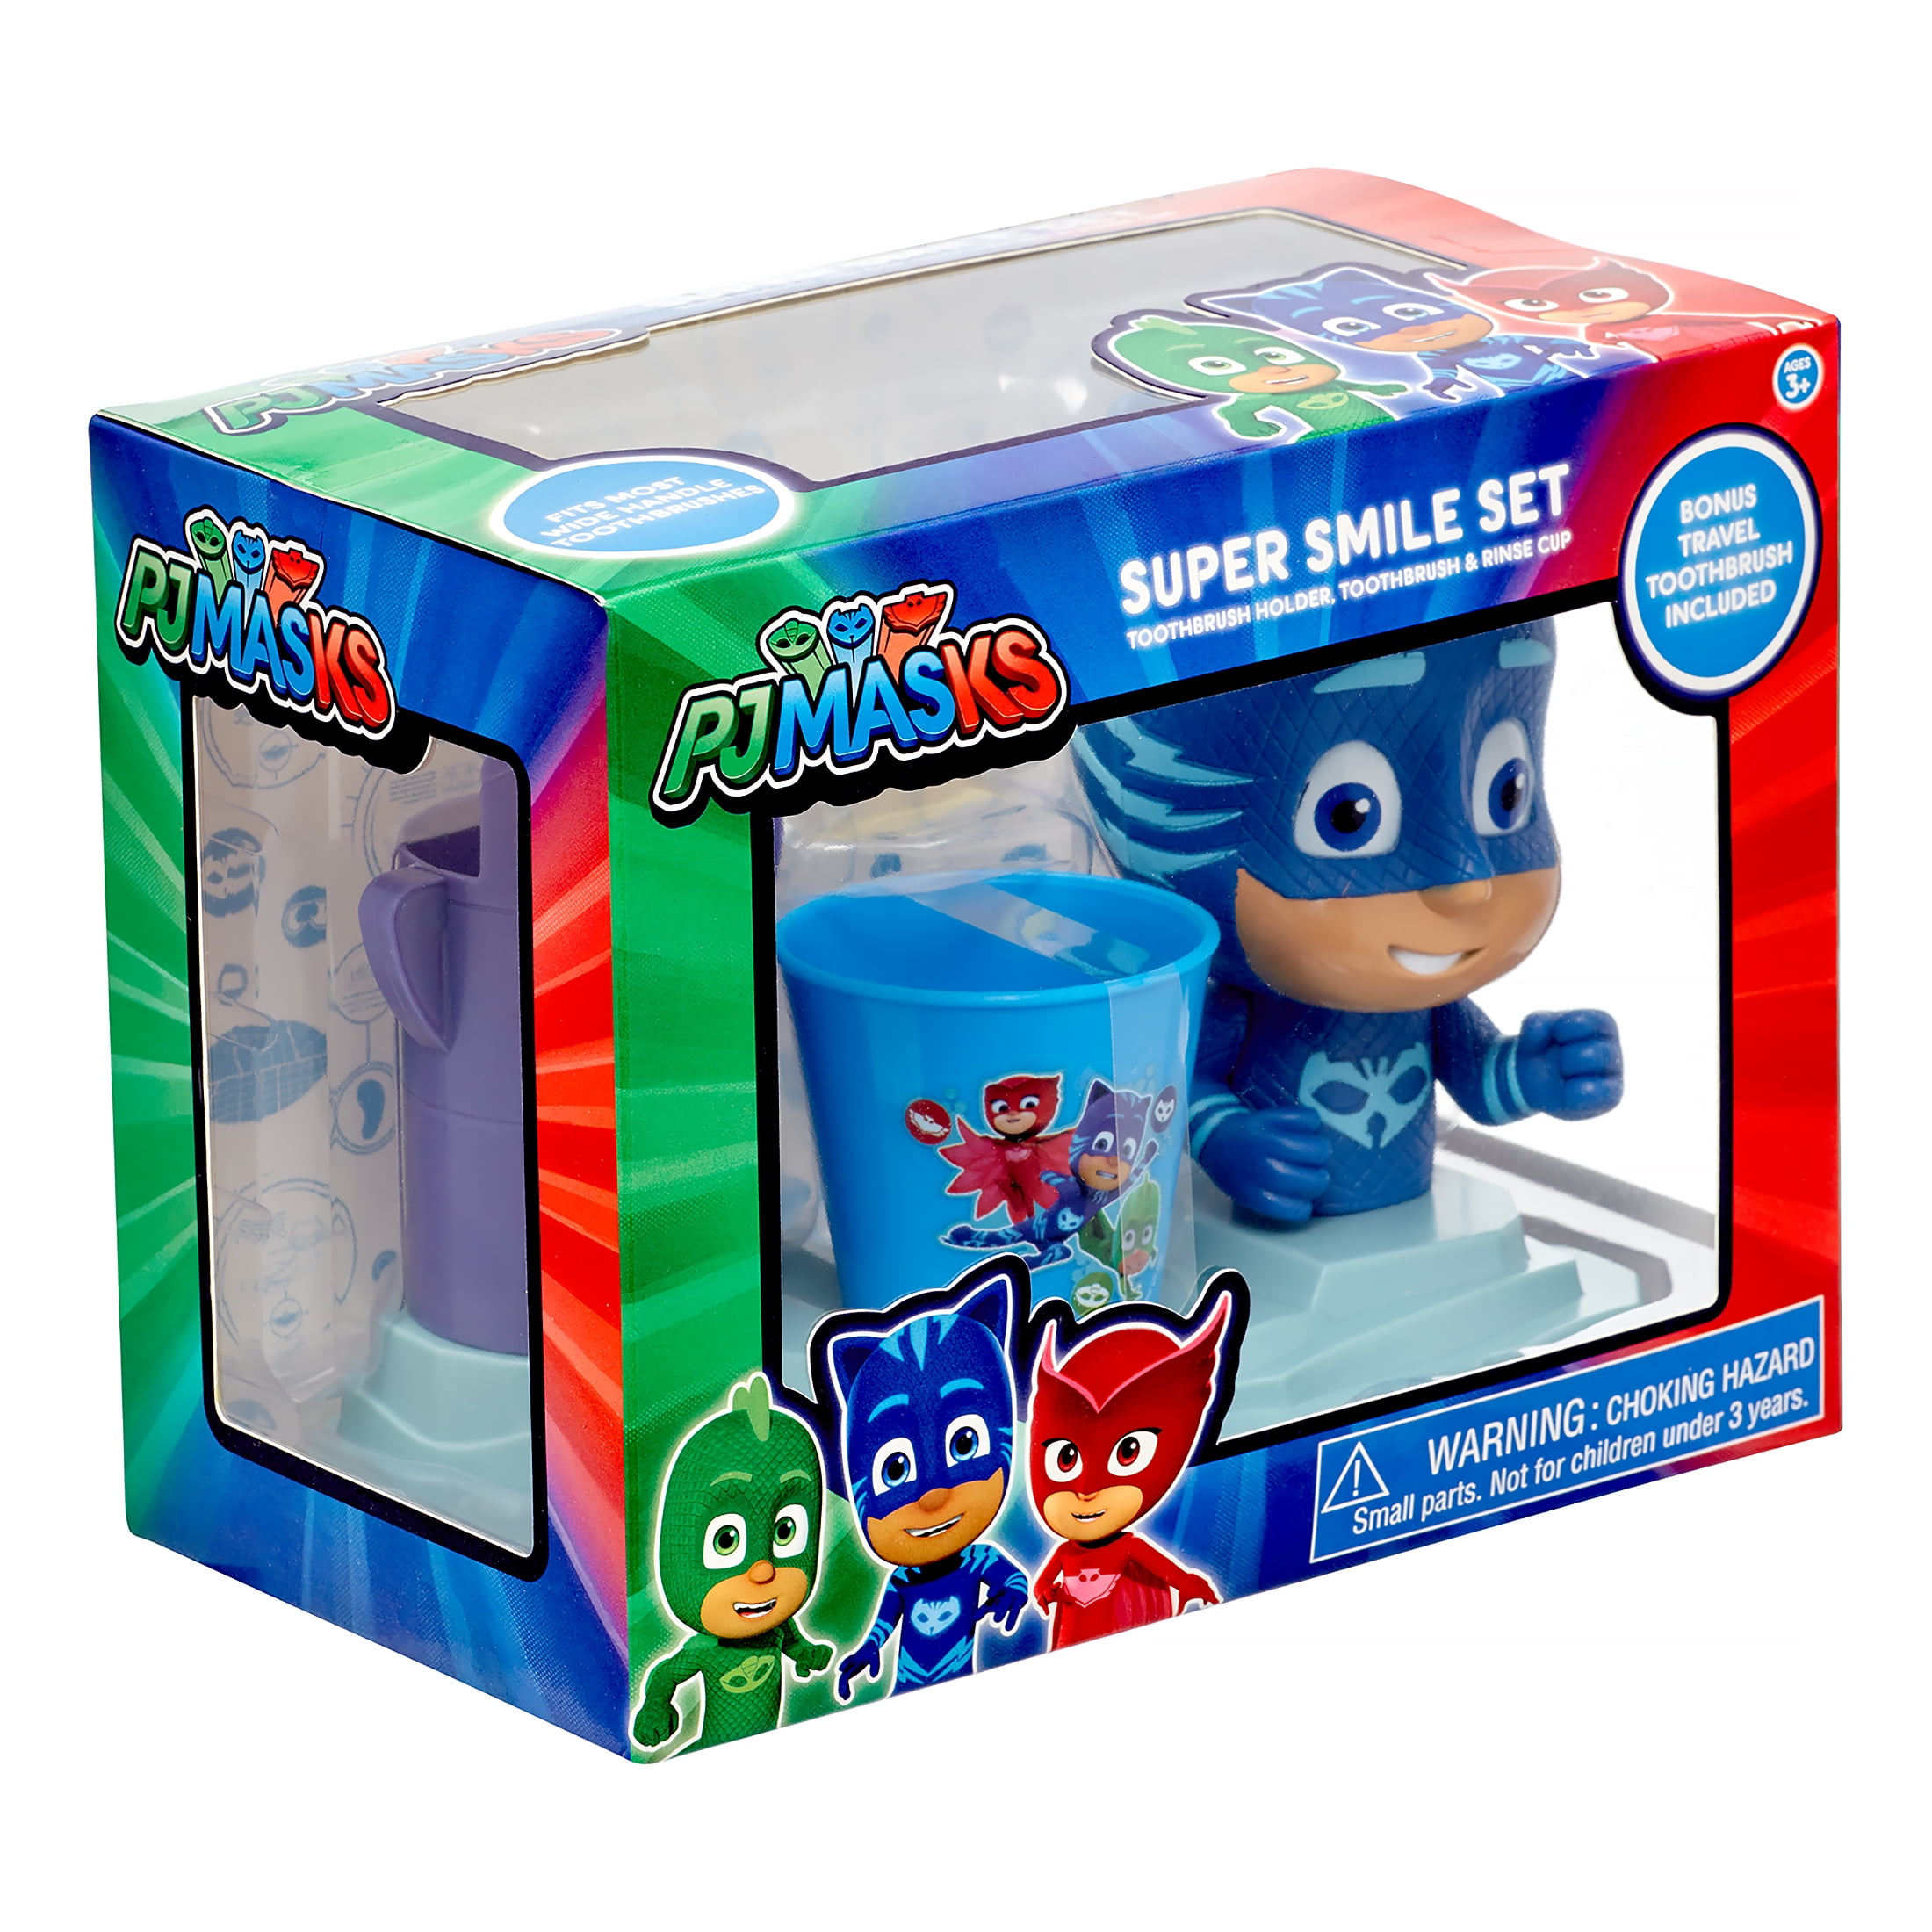 Details about   NEW Disney PJ MASKS Super Smile GIFT SET Toothbrush Holder Rinse Cup Tray CATBOY 